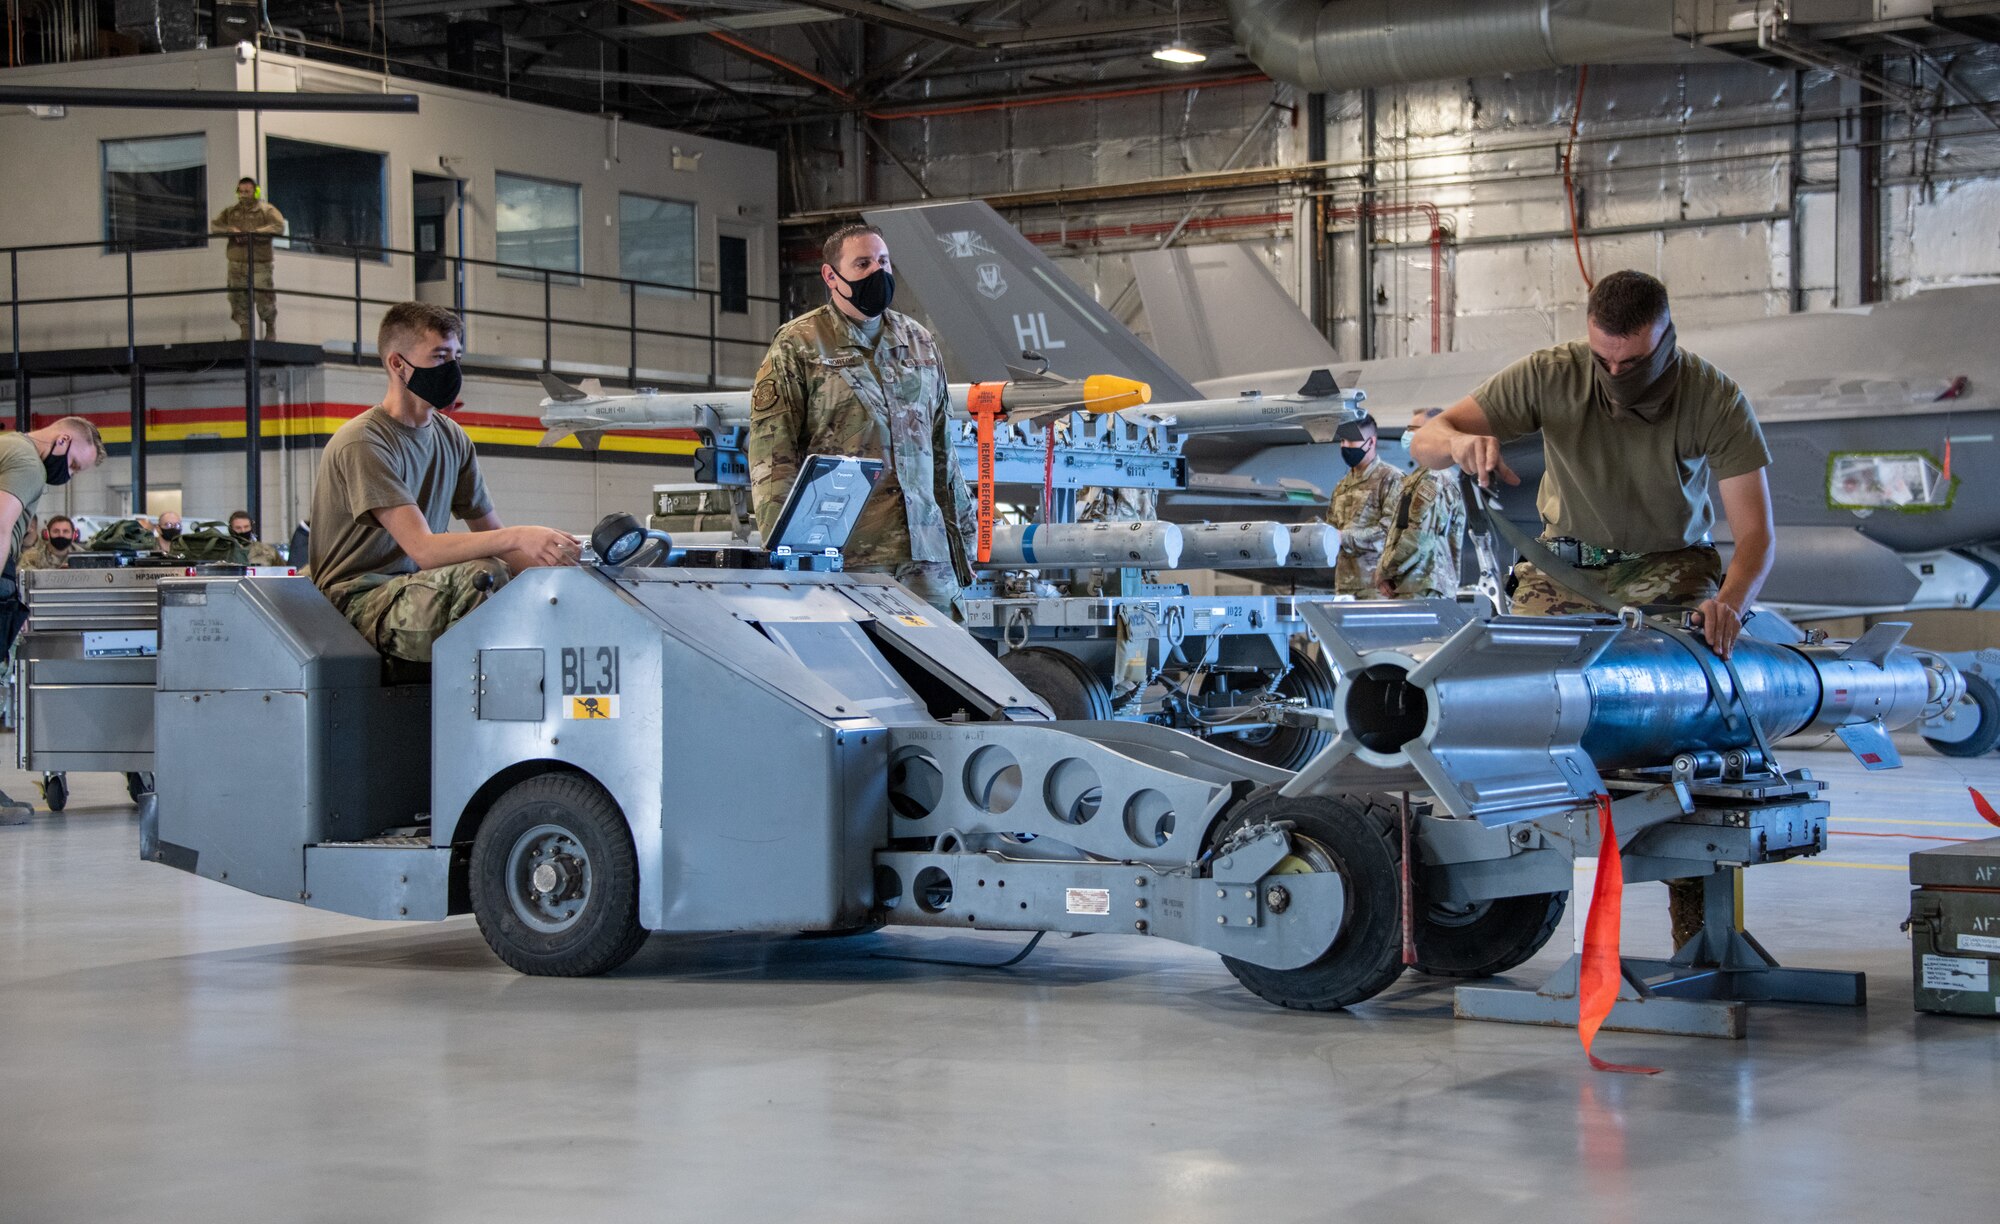 A judge watches two Airmen from the 419th Aircraft Maintenance Squadron load and secure an unarmed GBU-12 Pave Way to a bomb lift during a weapons load competition at Hill Air Force Base, Utah on Sept. 24, 2021. The quarterly competition focuses on speed, accuracy, and safety, ensuring standard loading procedures and proficiency across the wings. (U.S. Air Force photo by Senior Airman Erica Webster)